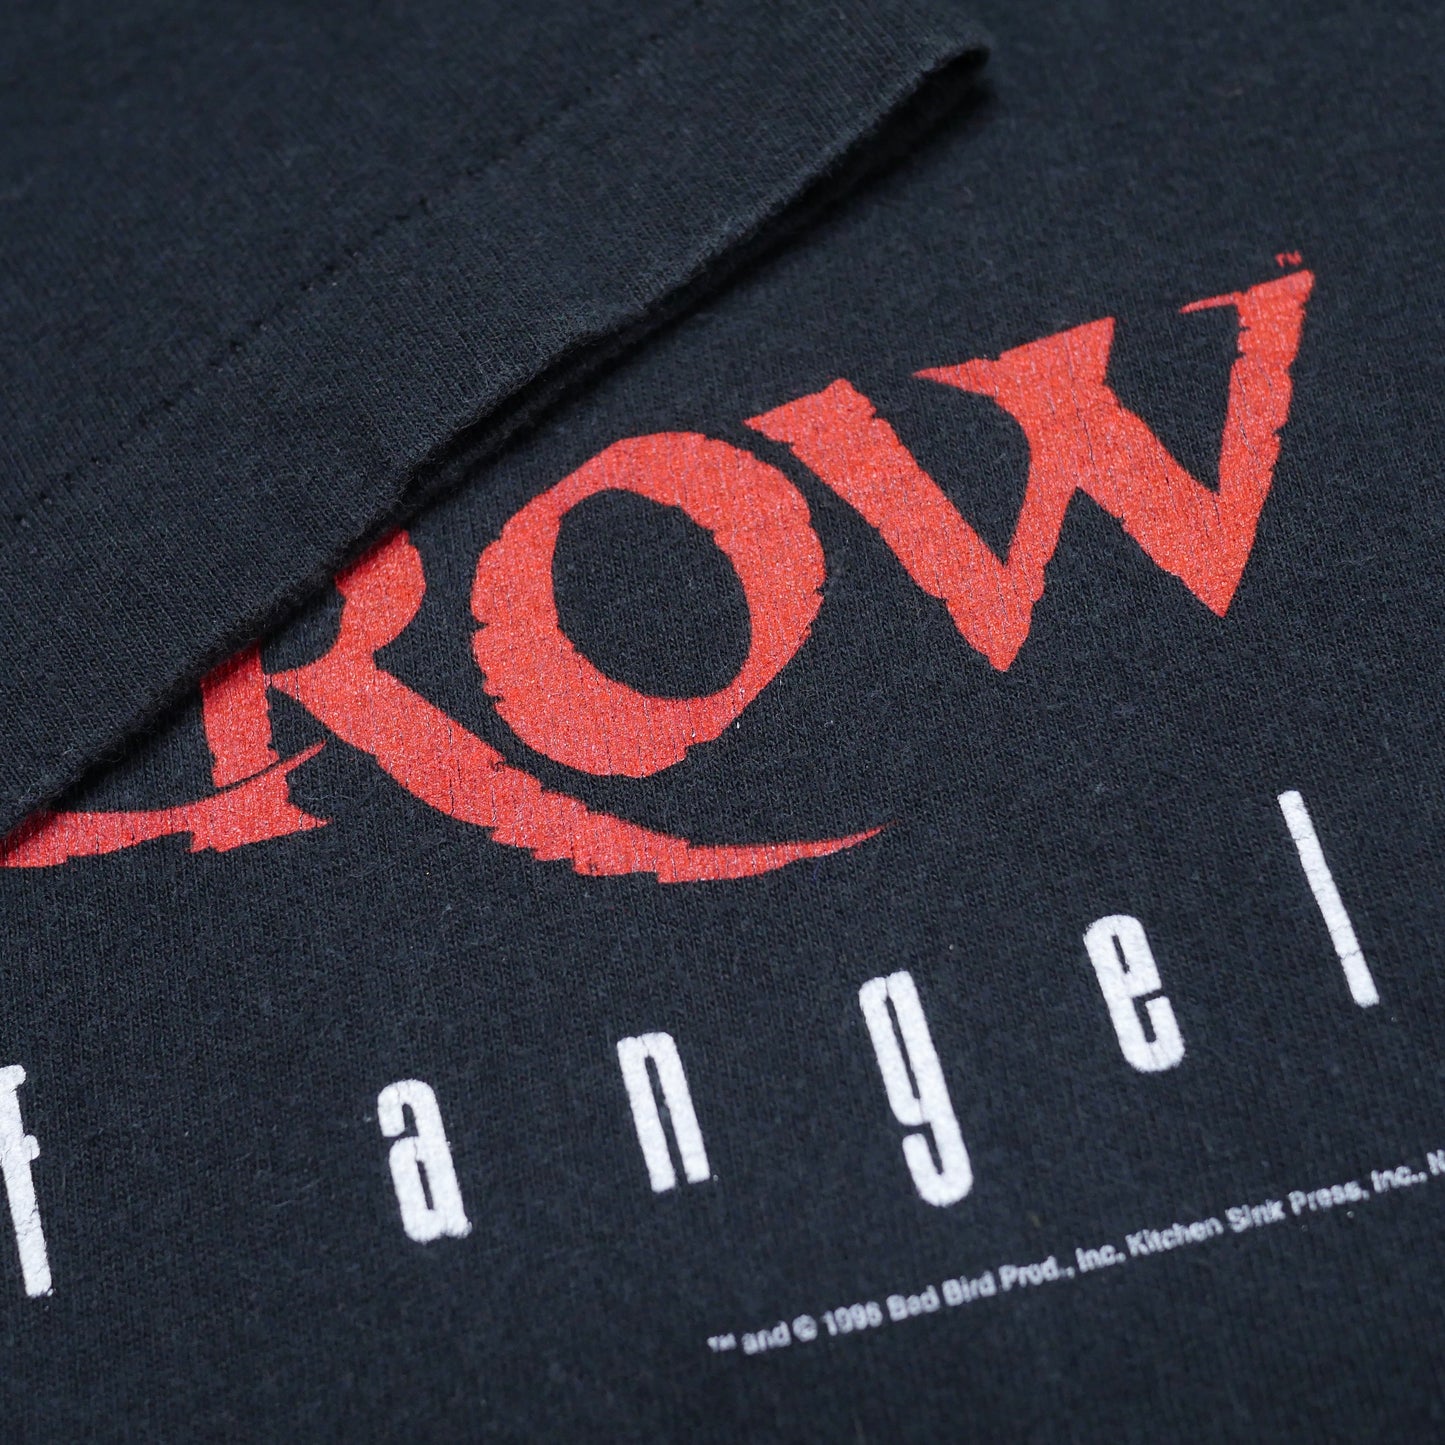 The Crow City Of Angels Shirt